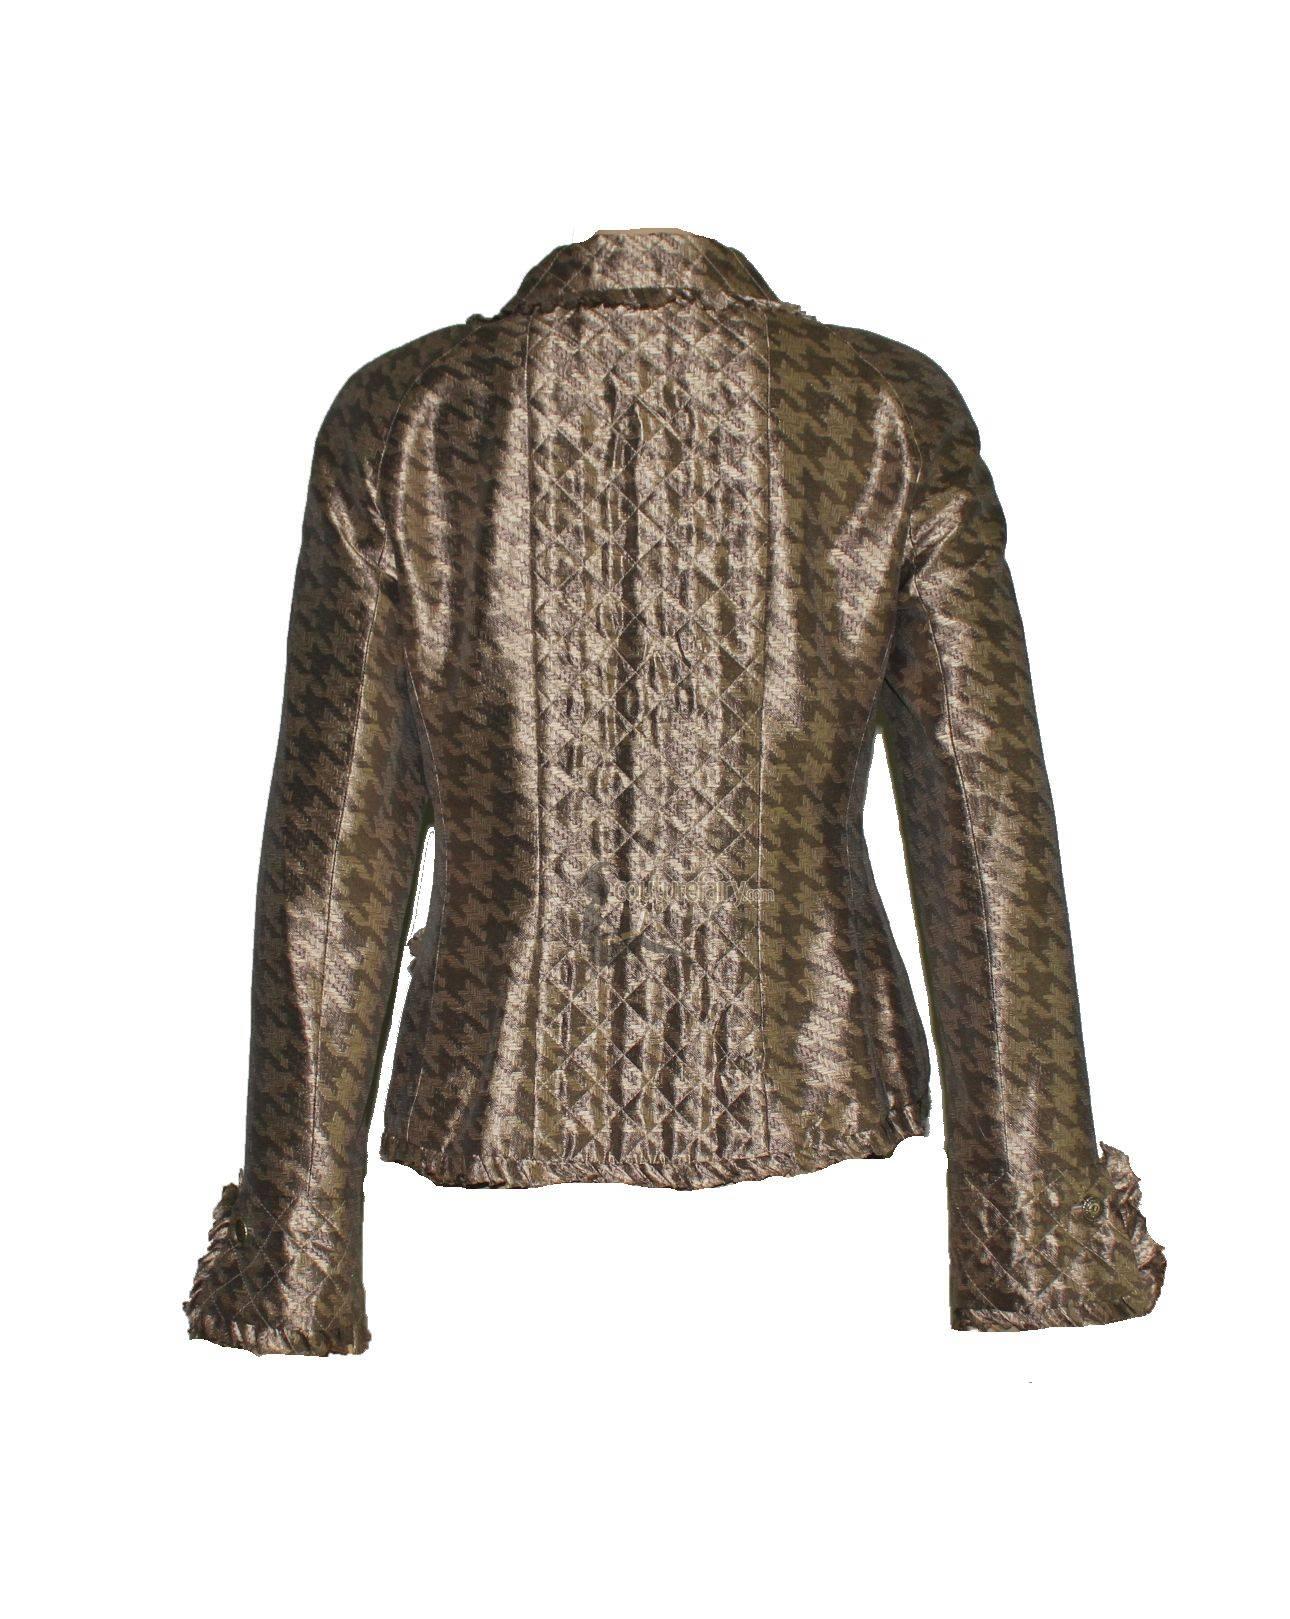 Women's CHANEL Quilted Silk Print Jacket Blazer with Ruffles Métiers d’Art Collection 42 For Sale